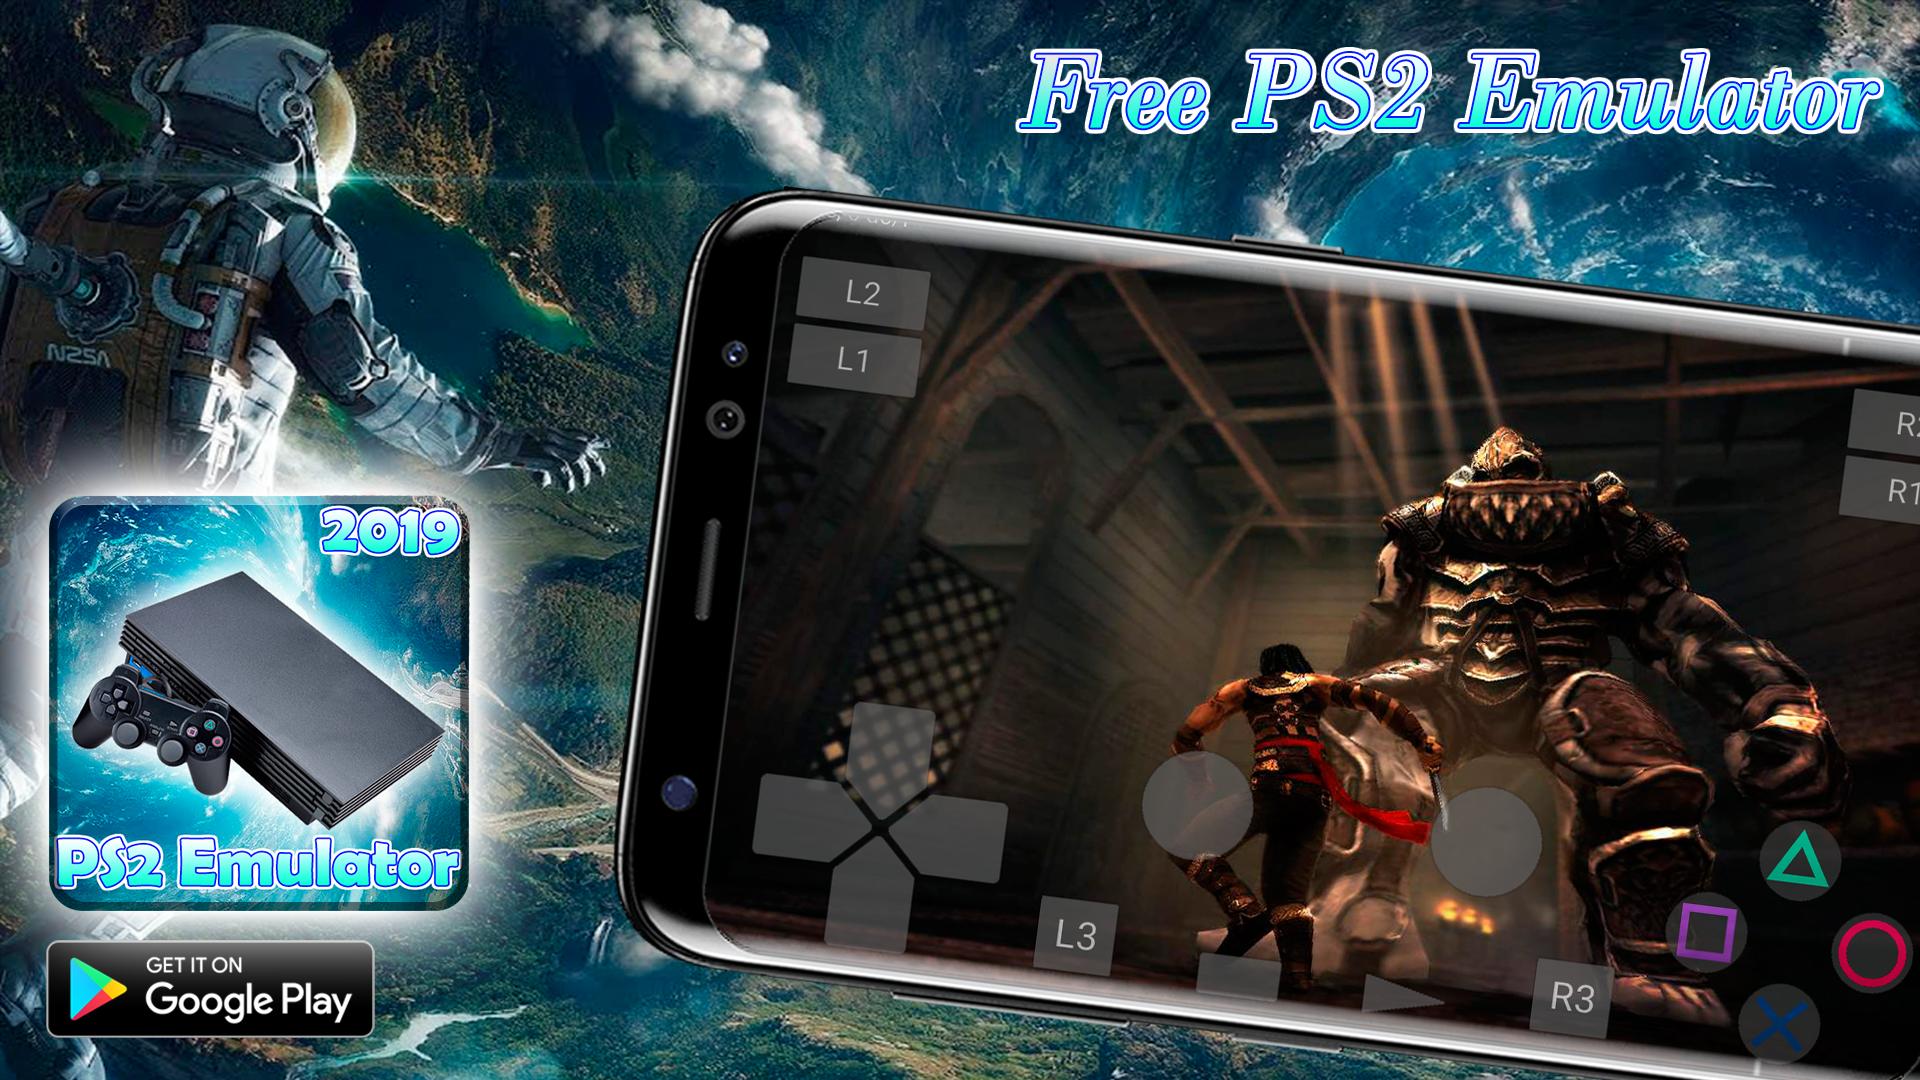 Download Damon Ps2 Pro Emulator For Android Free Edenclever